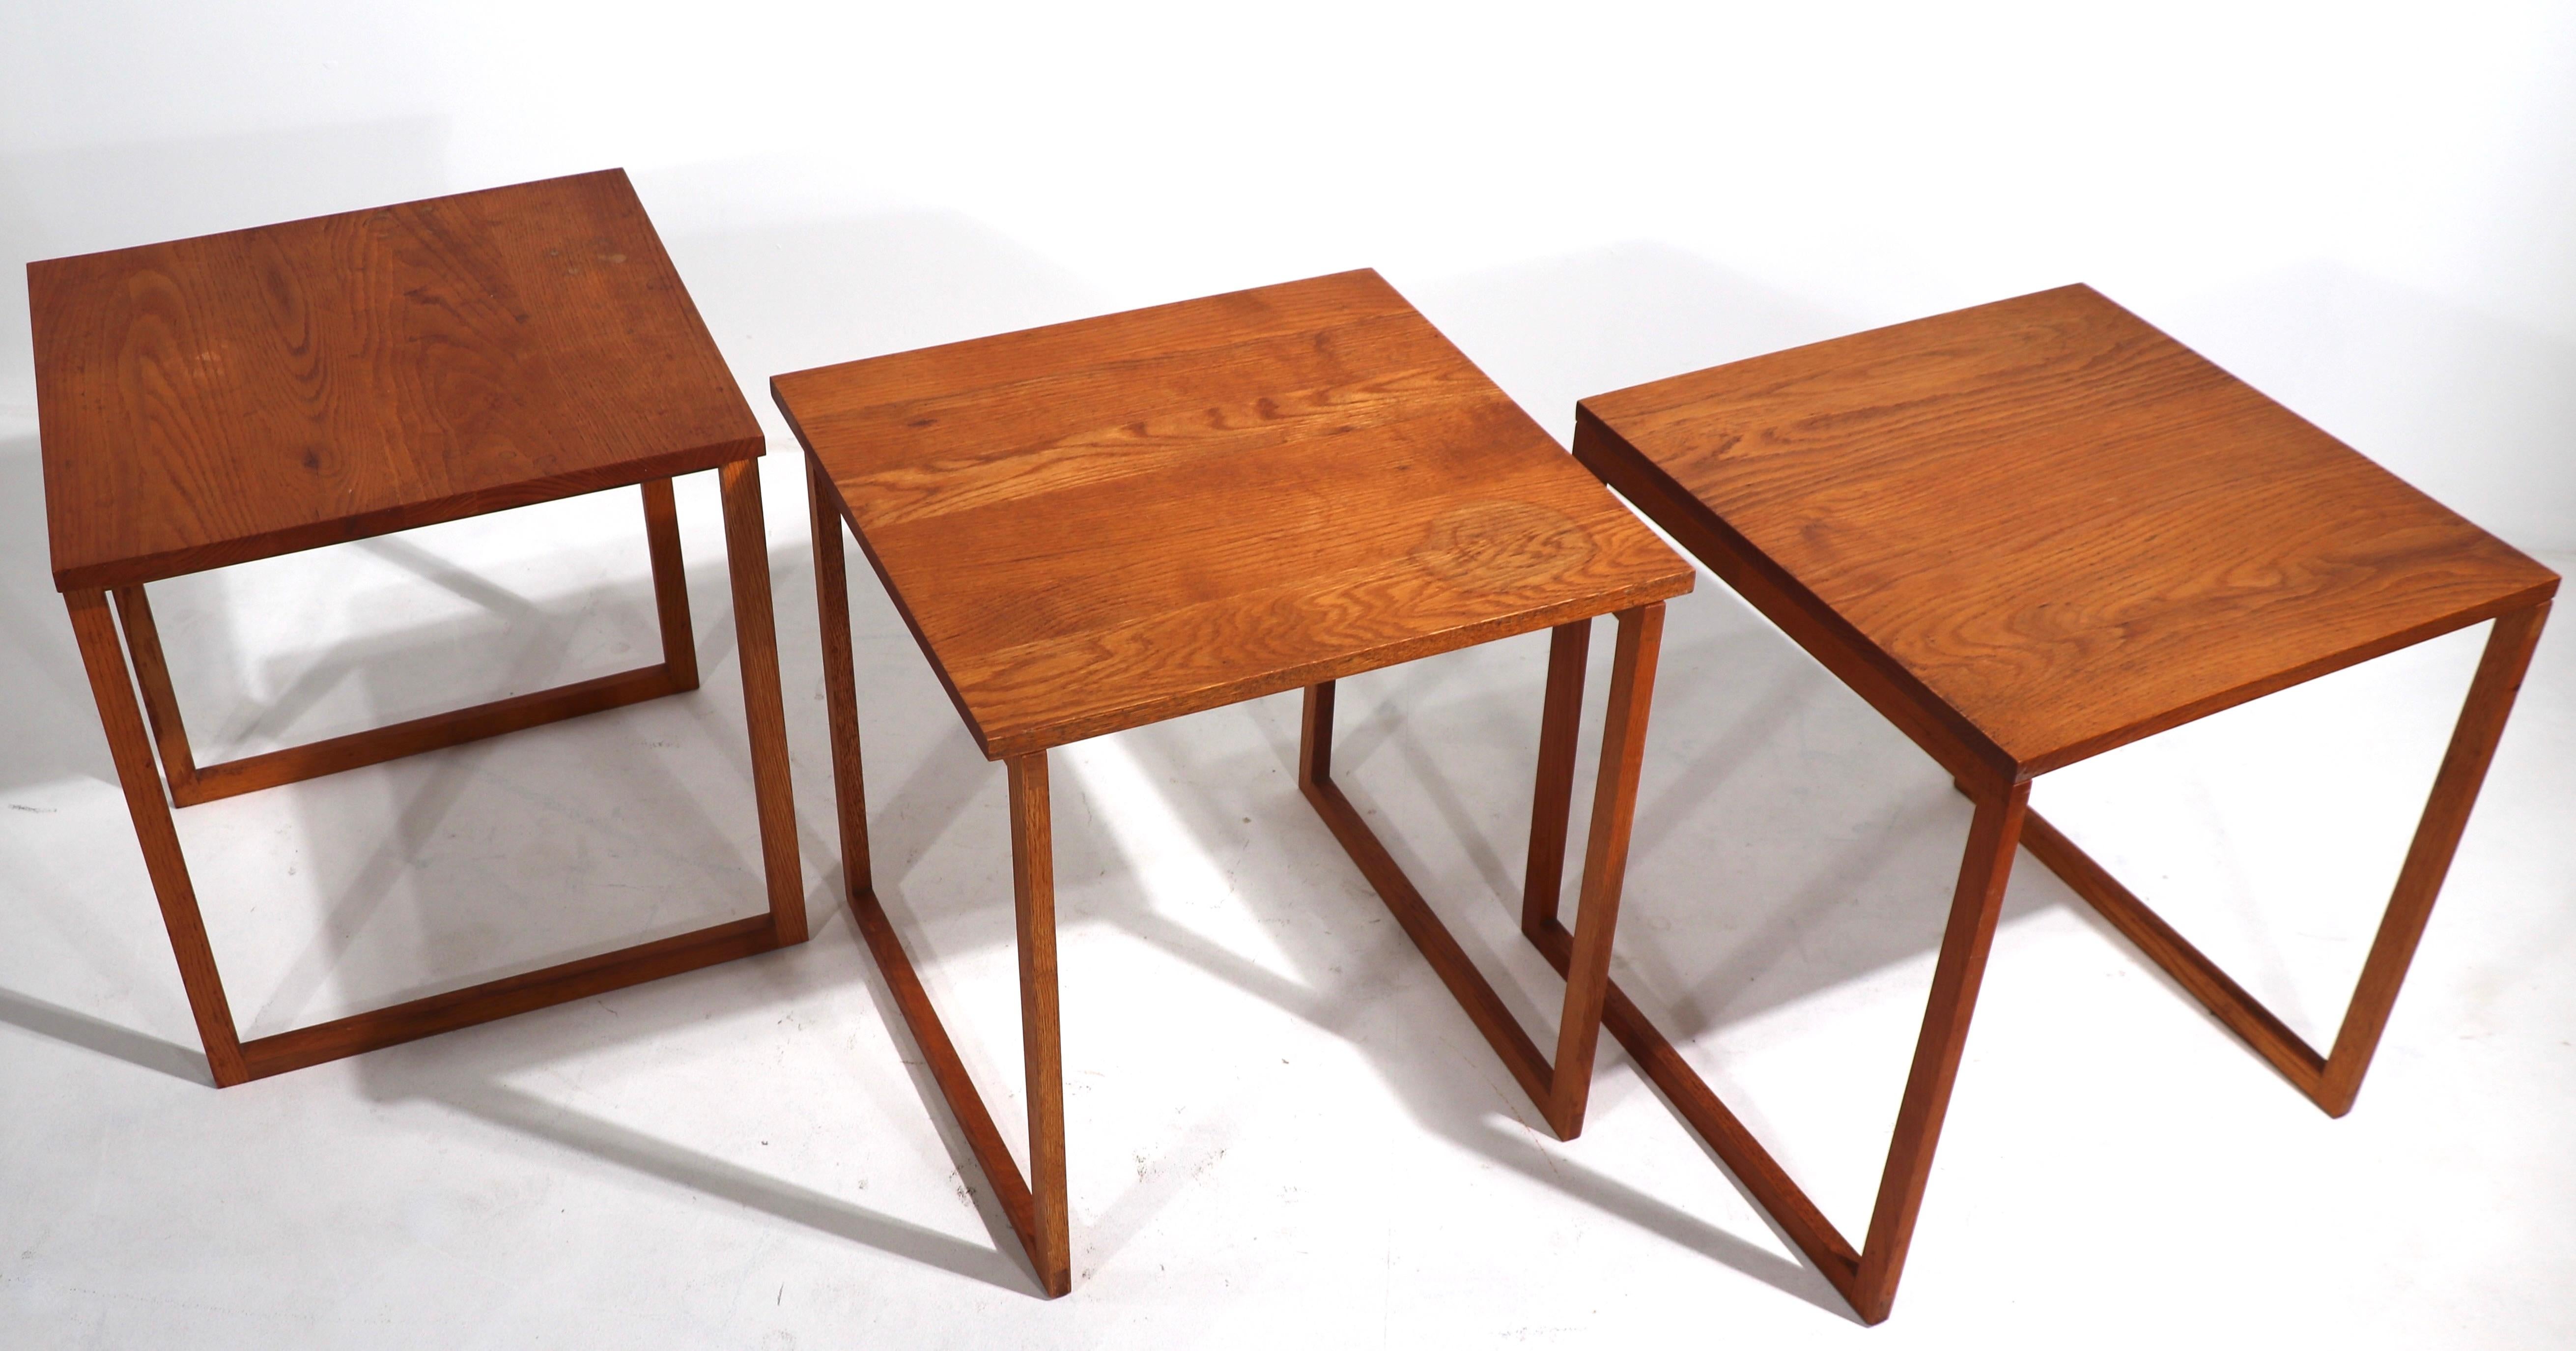 Iconic set of interlocking tables, consisting of 3 tables which when nested form a cube. All three are in very good original condition, the tops show cosmetic wear to the finish, please see images. Classic Danish Modern design, this set exhibits the